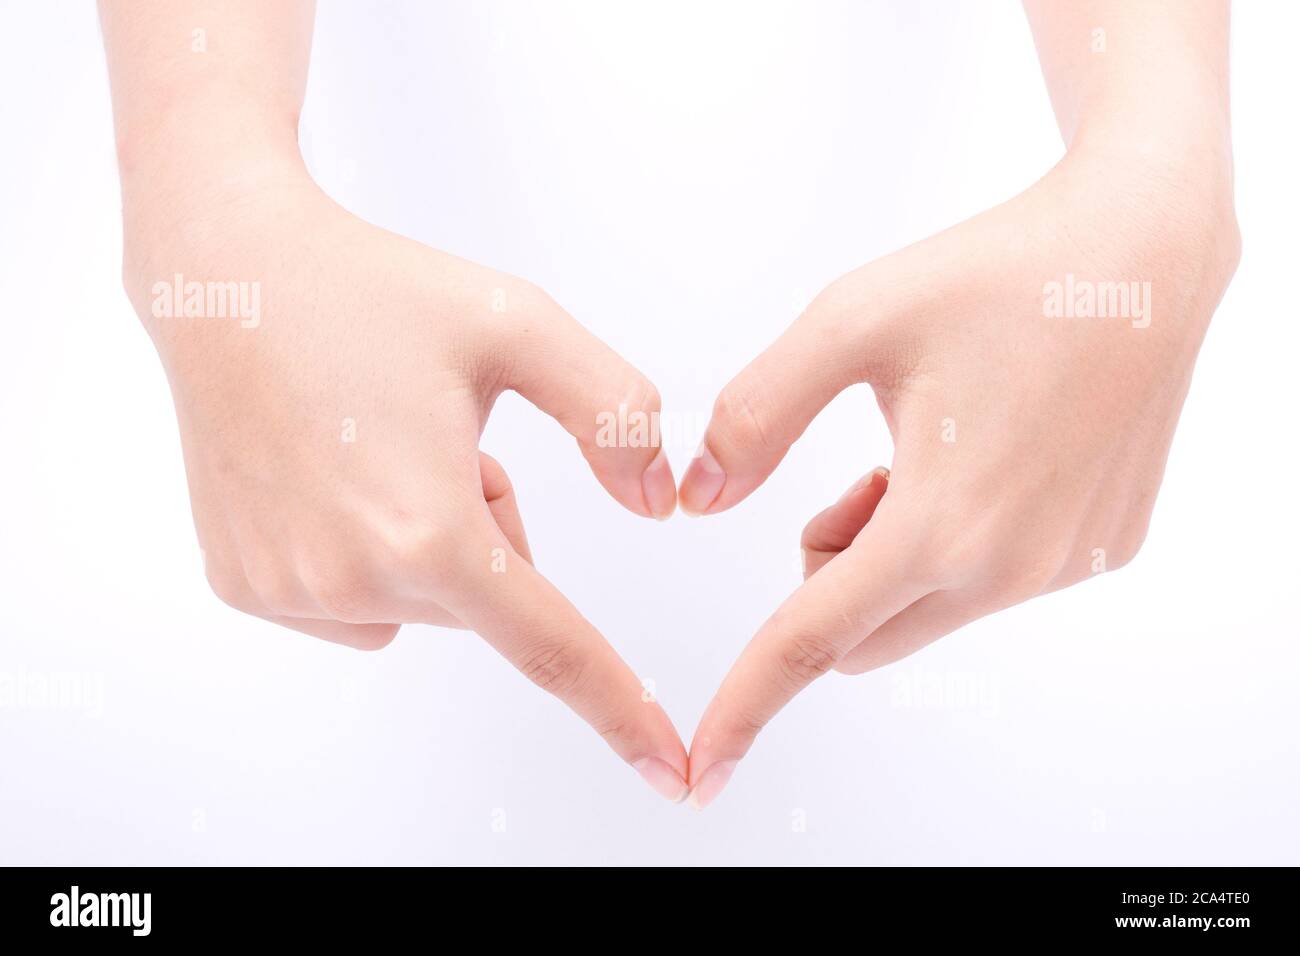 finger hand symbols isolated concept love heart shape framing and health care composition on white background Stock Photo